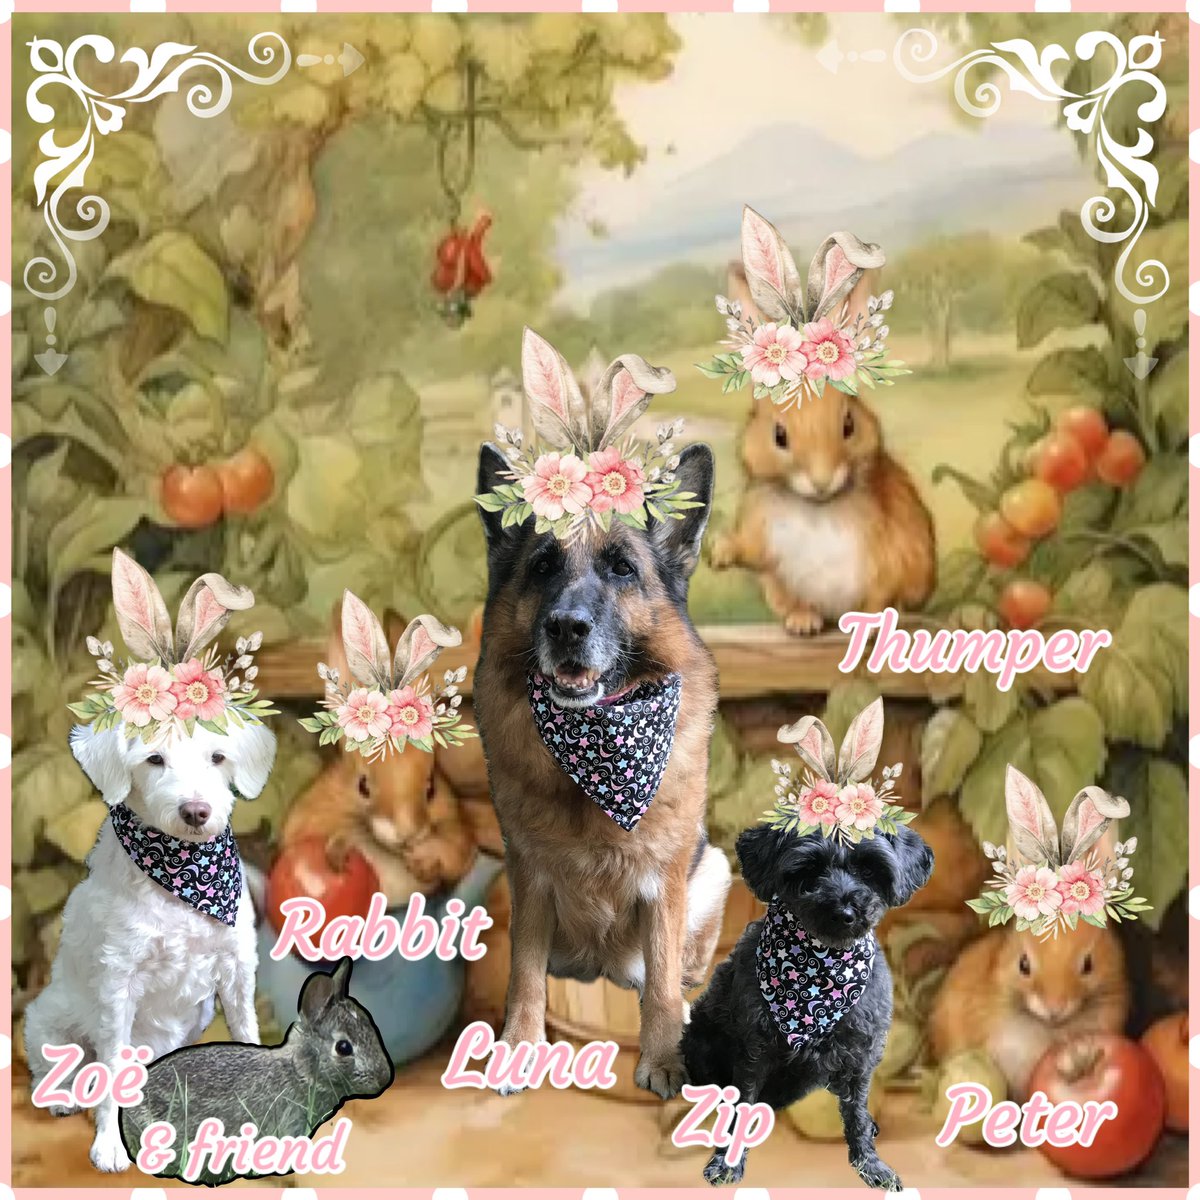 🌸 🐇Hi besties!! We are here with our bunny pals to wish all of you a wonderful week, especially those celebrating special occasions with family and friends 🐇🌸

#Easter
#FamilyTraditions
#EggHunts
#GoddessĒostre 
#SpringAndRebirth
#SpringBreak2024 

🌸💕Luna, Zip, Zoë & Mom